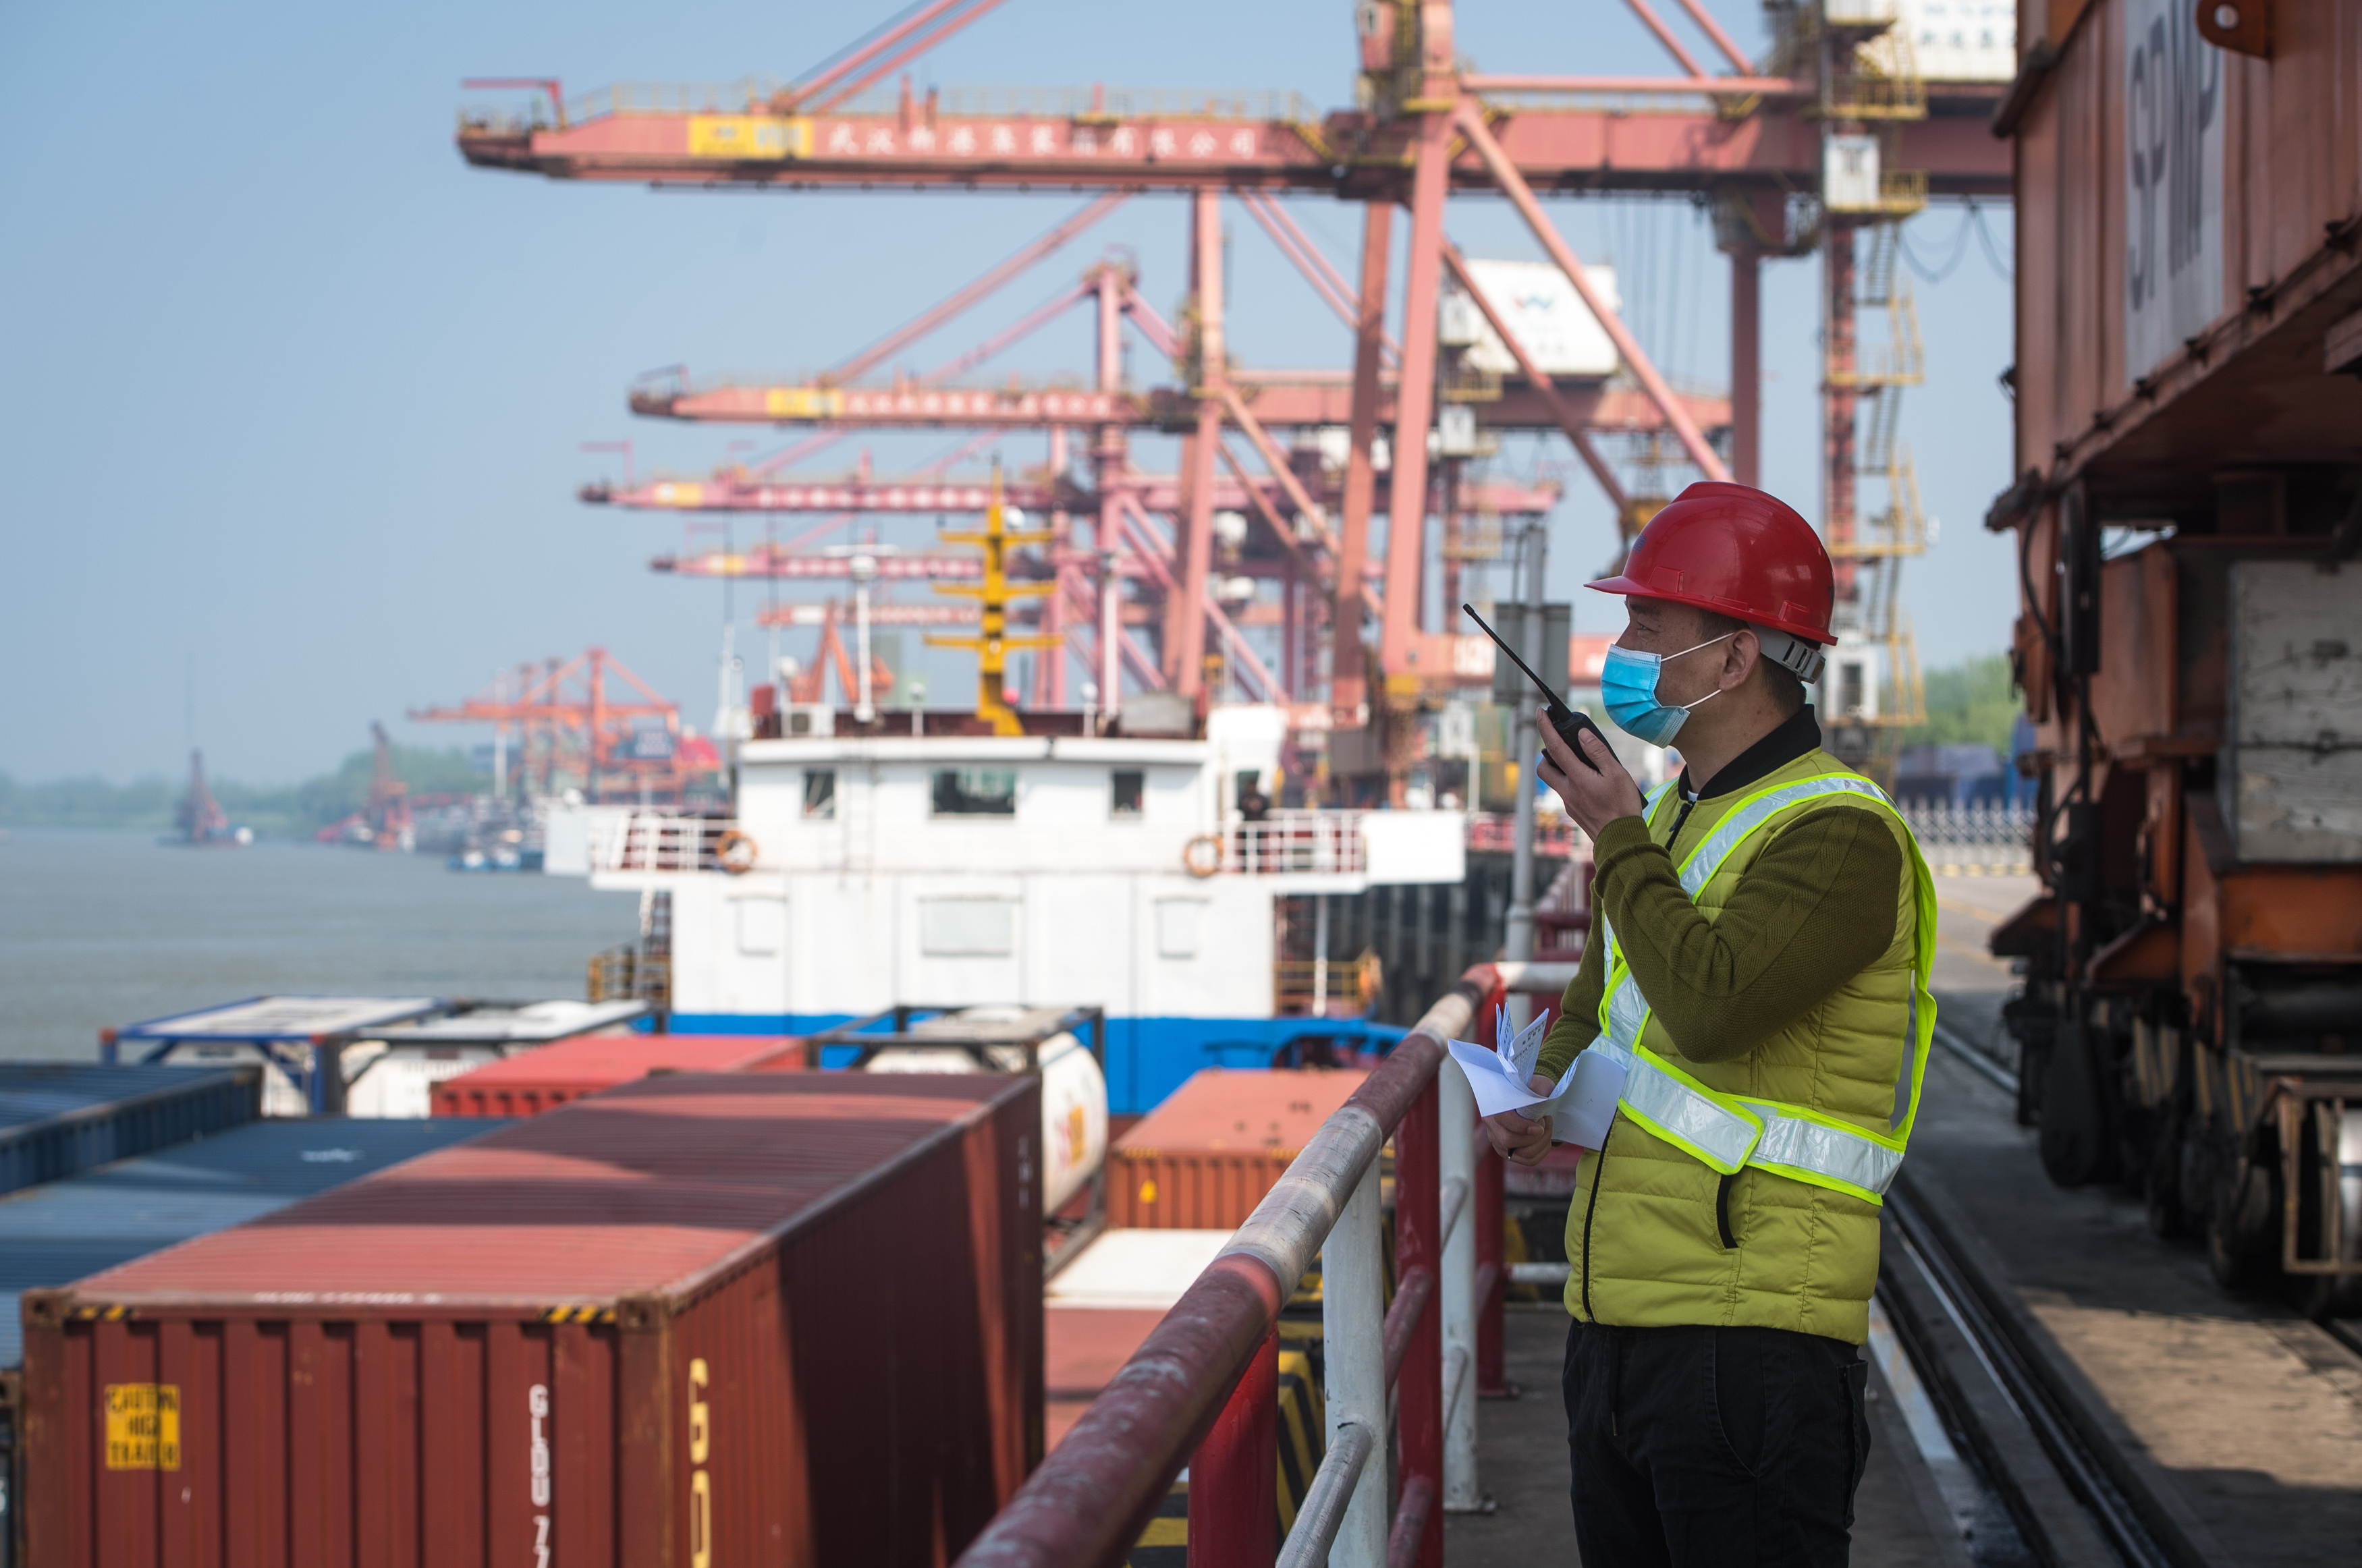 A worker at the Yangluo Port in Wuhan, central China’s Hubei province on April 12, 2020. Wuhan lifted outbound travel restrictions from April 8 after almost 11 weeks of lockdown to stem the spread of COVID-19. The cargoes piled up at ports have also been shipping away since the water ports in Wuhan resumed operation. Photo: Xinhua
